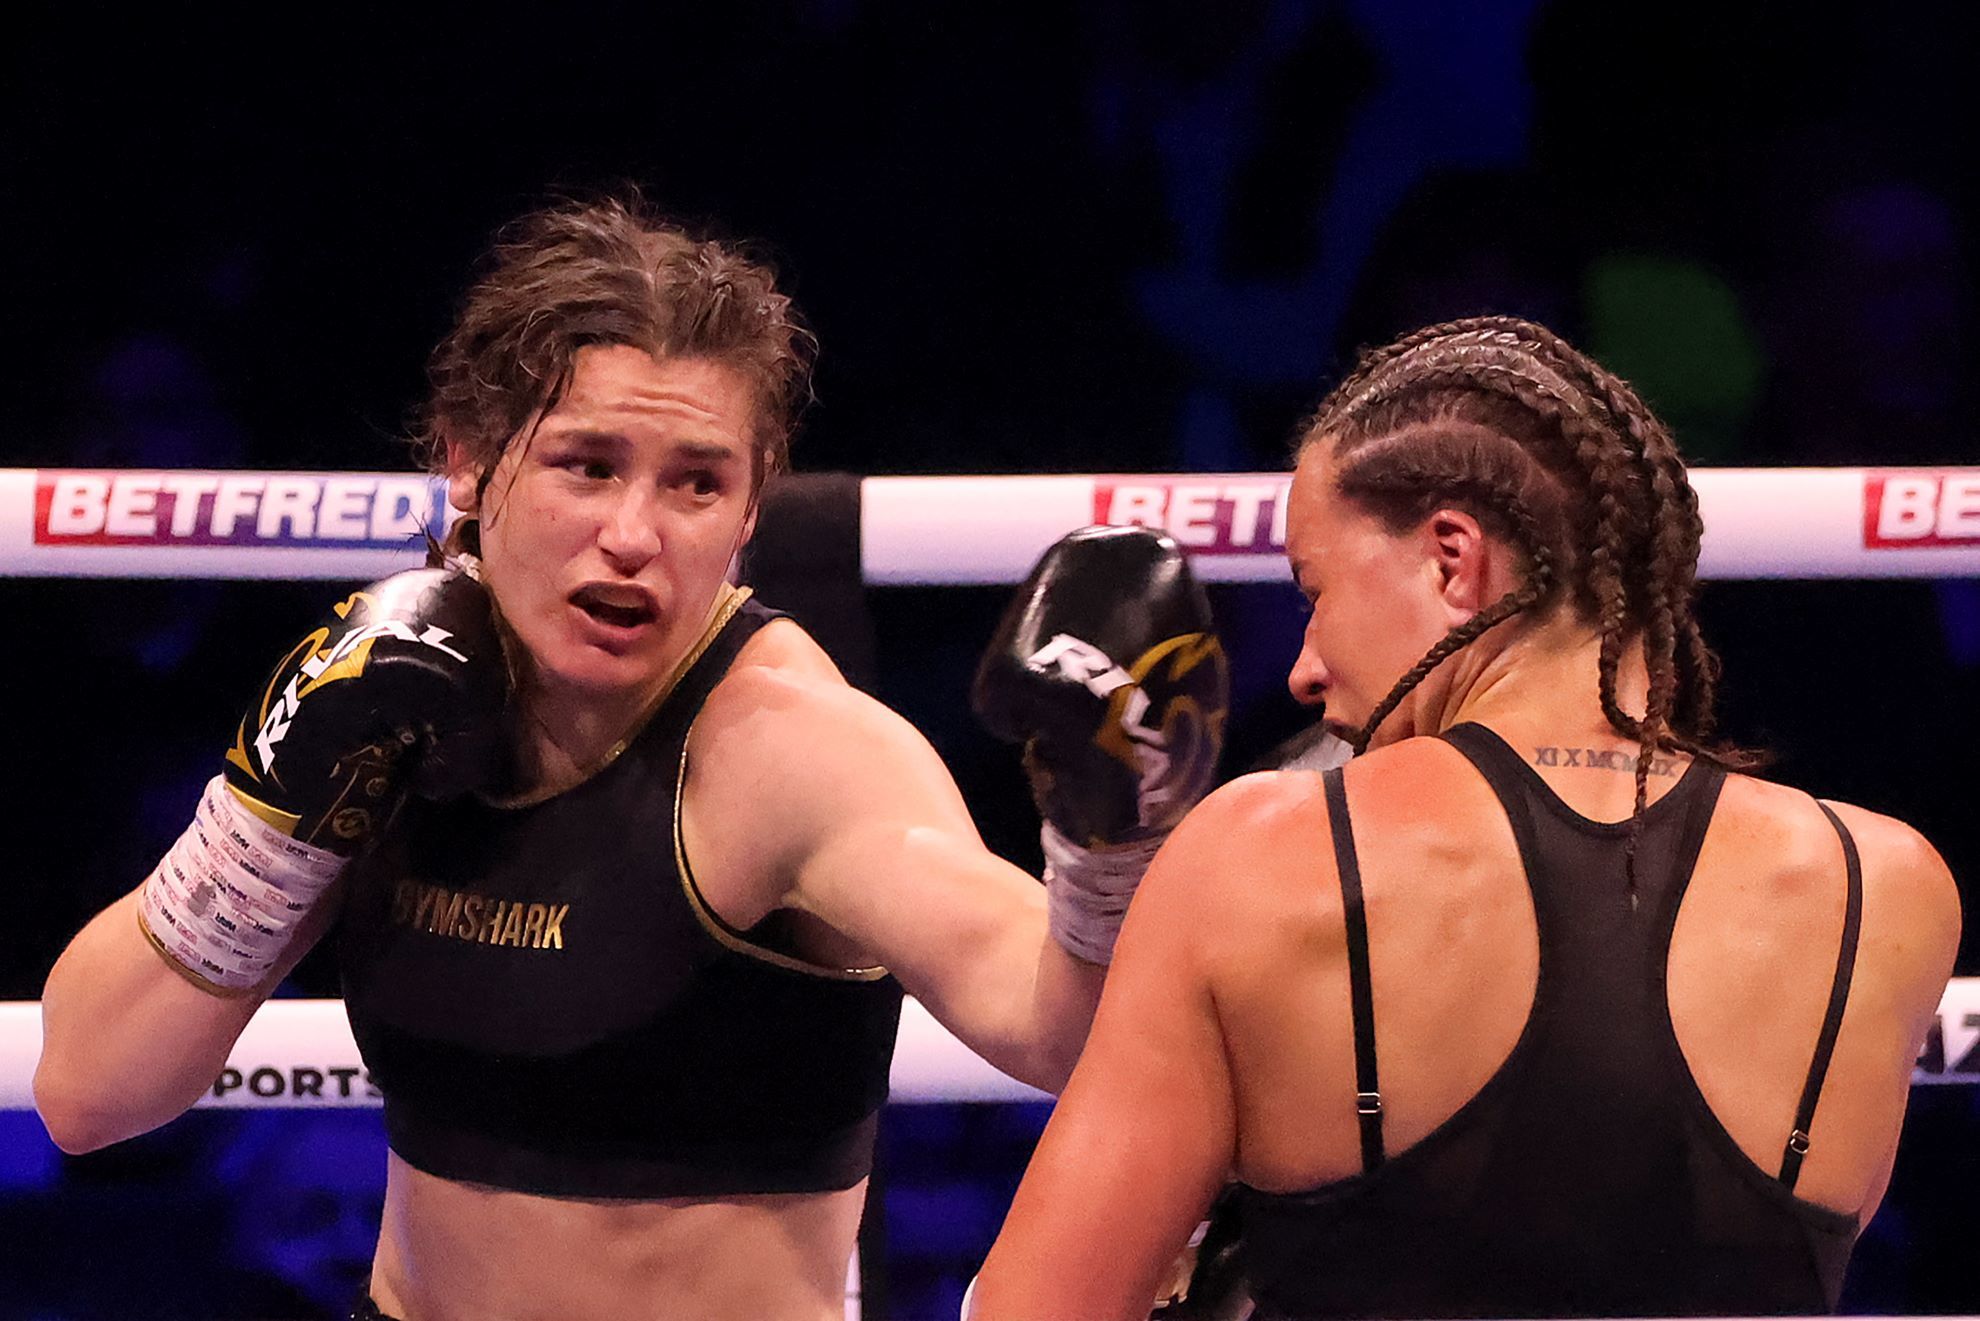 Katie Taylor lands a punch on Britain's Chantelle Cameron during their light-welterweight boxing world title fight.